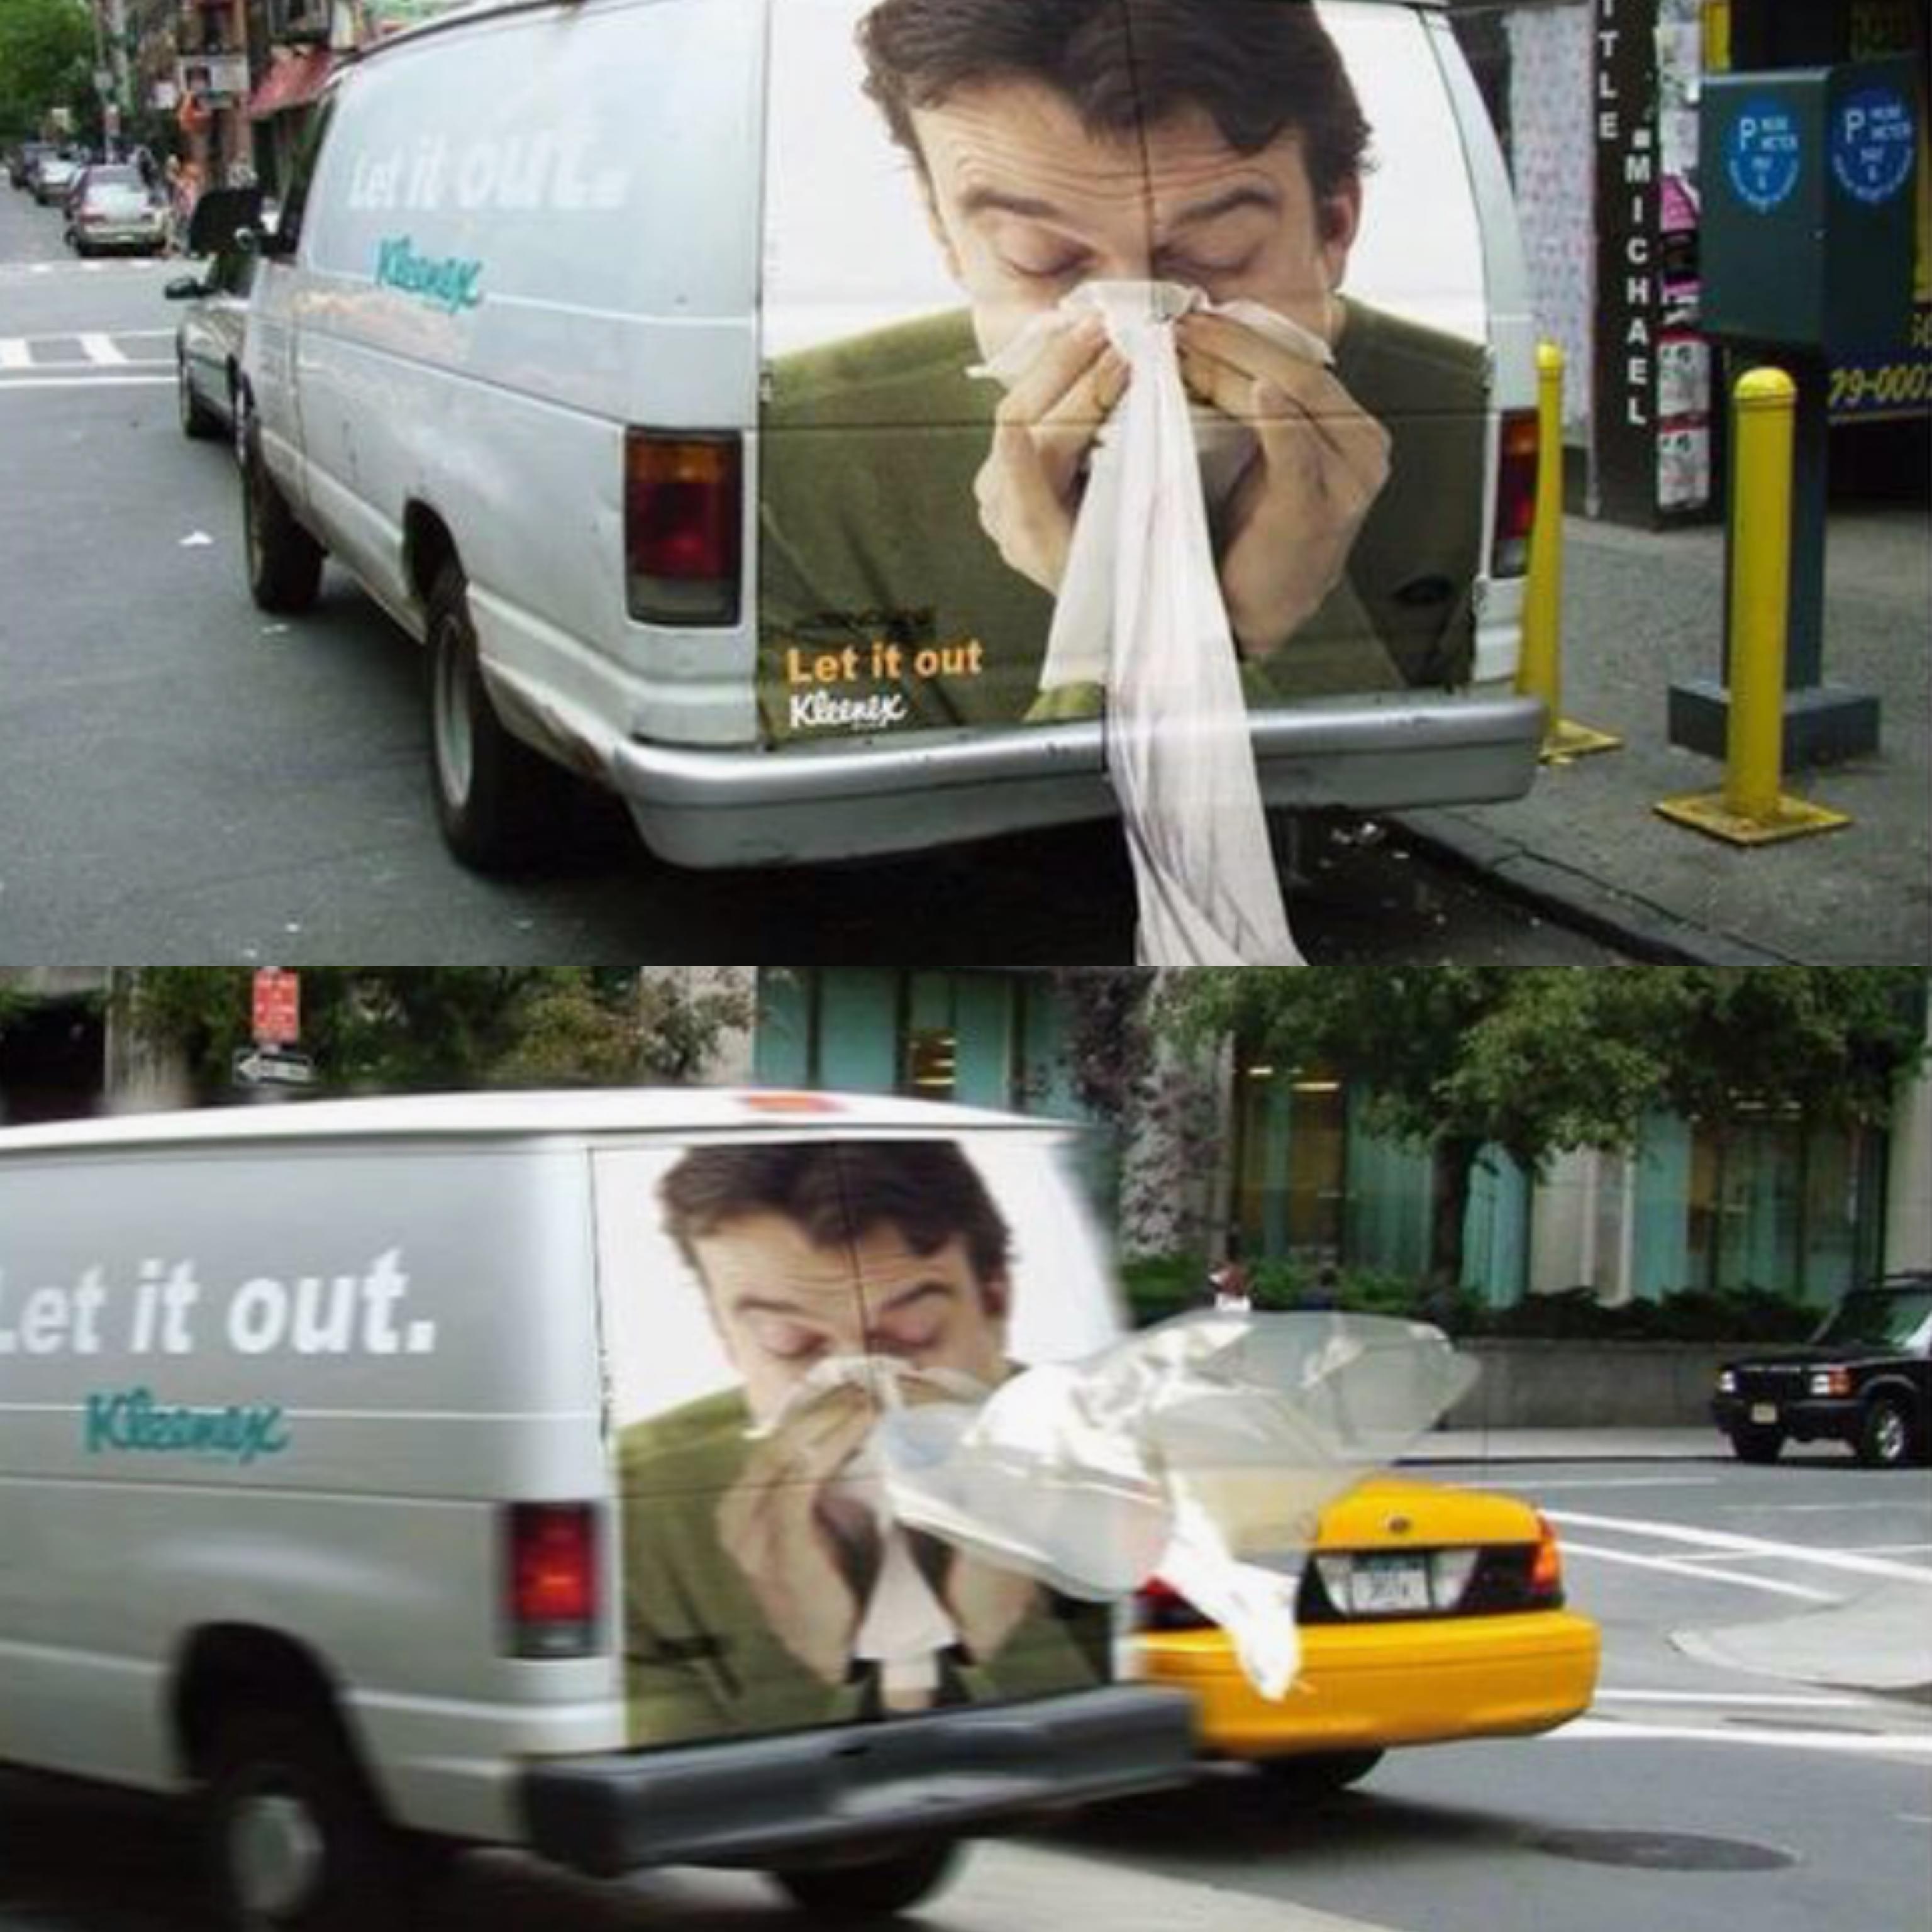 This Kleenex ambient relies on the back of the vehicle to motion the graphic